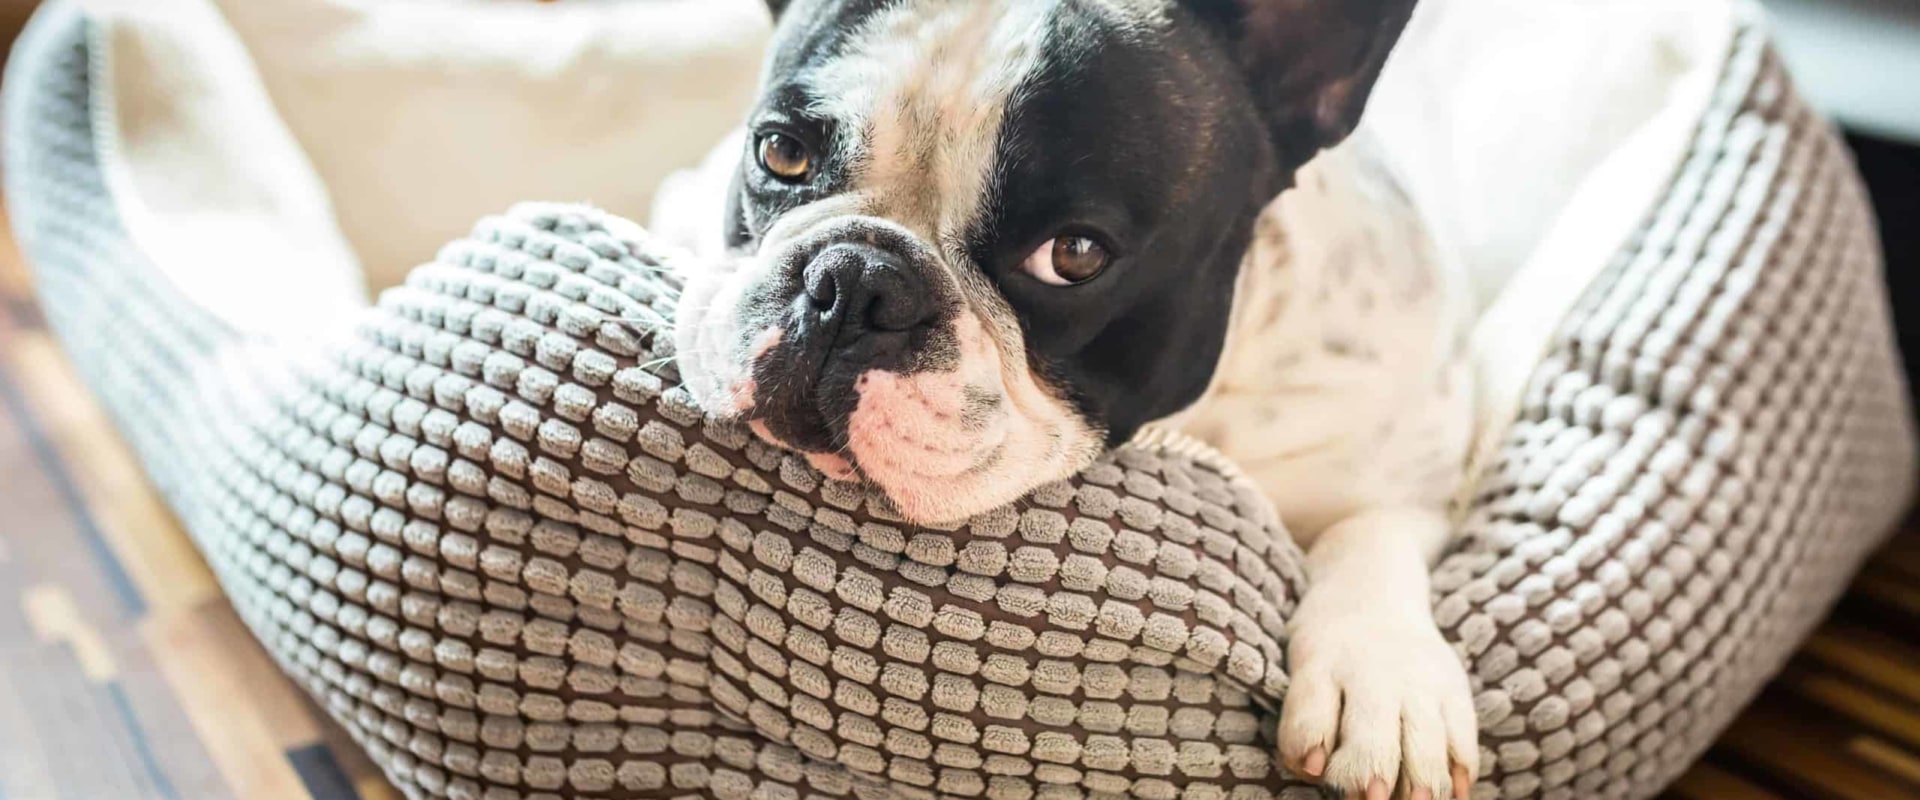 How to Tell if Your Pet Dog Needs More Sleep or Rest | Help your dogs get enough sleep